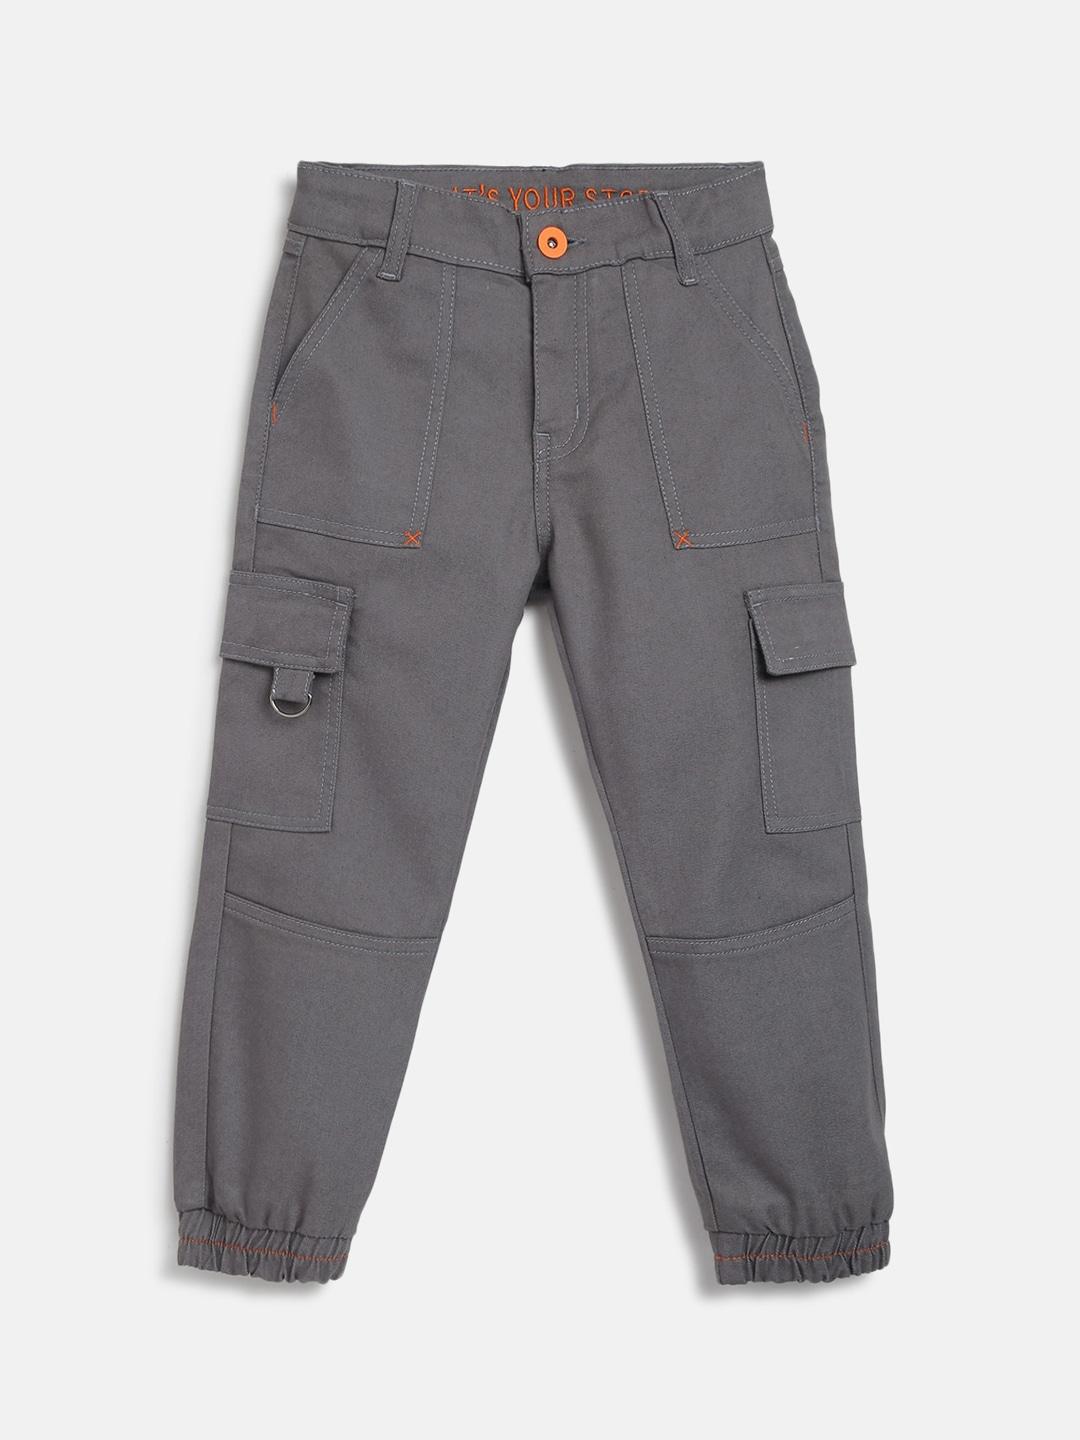 tales & stories boys grey cargos trousers